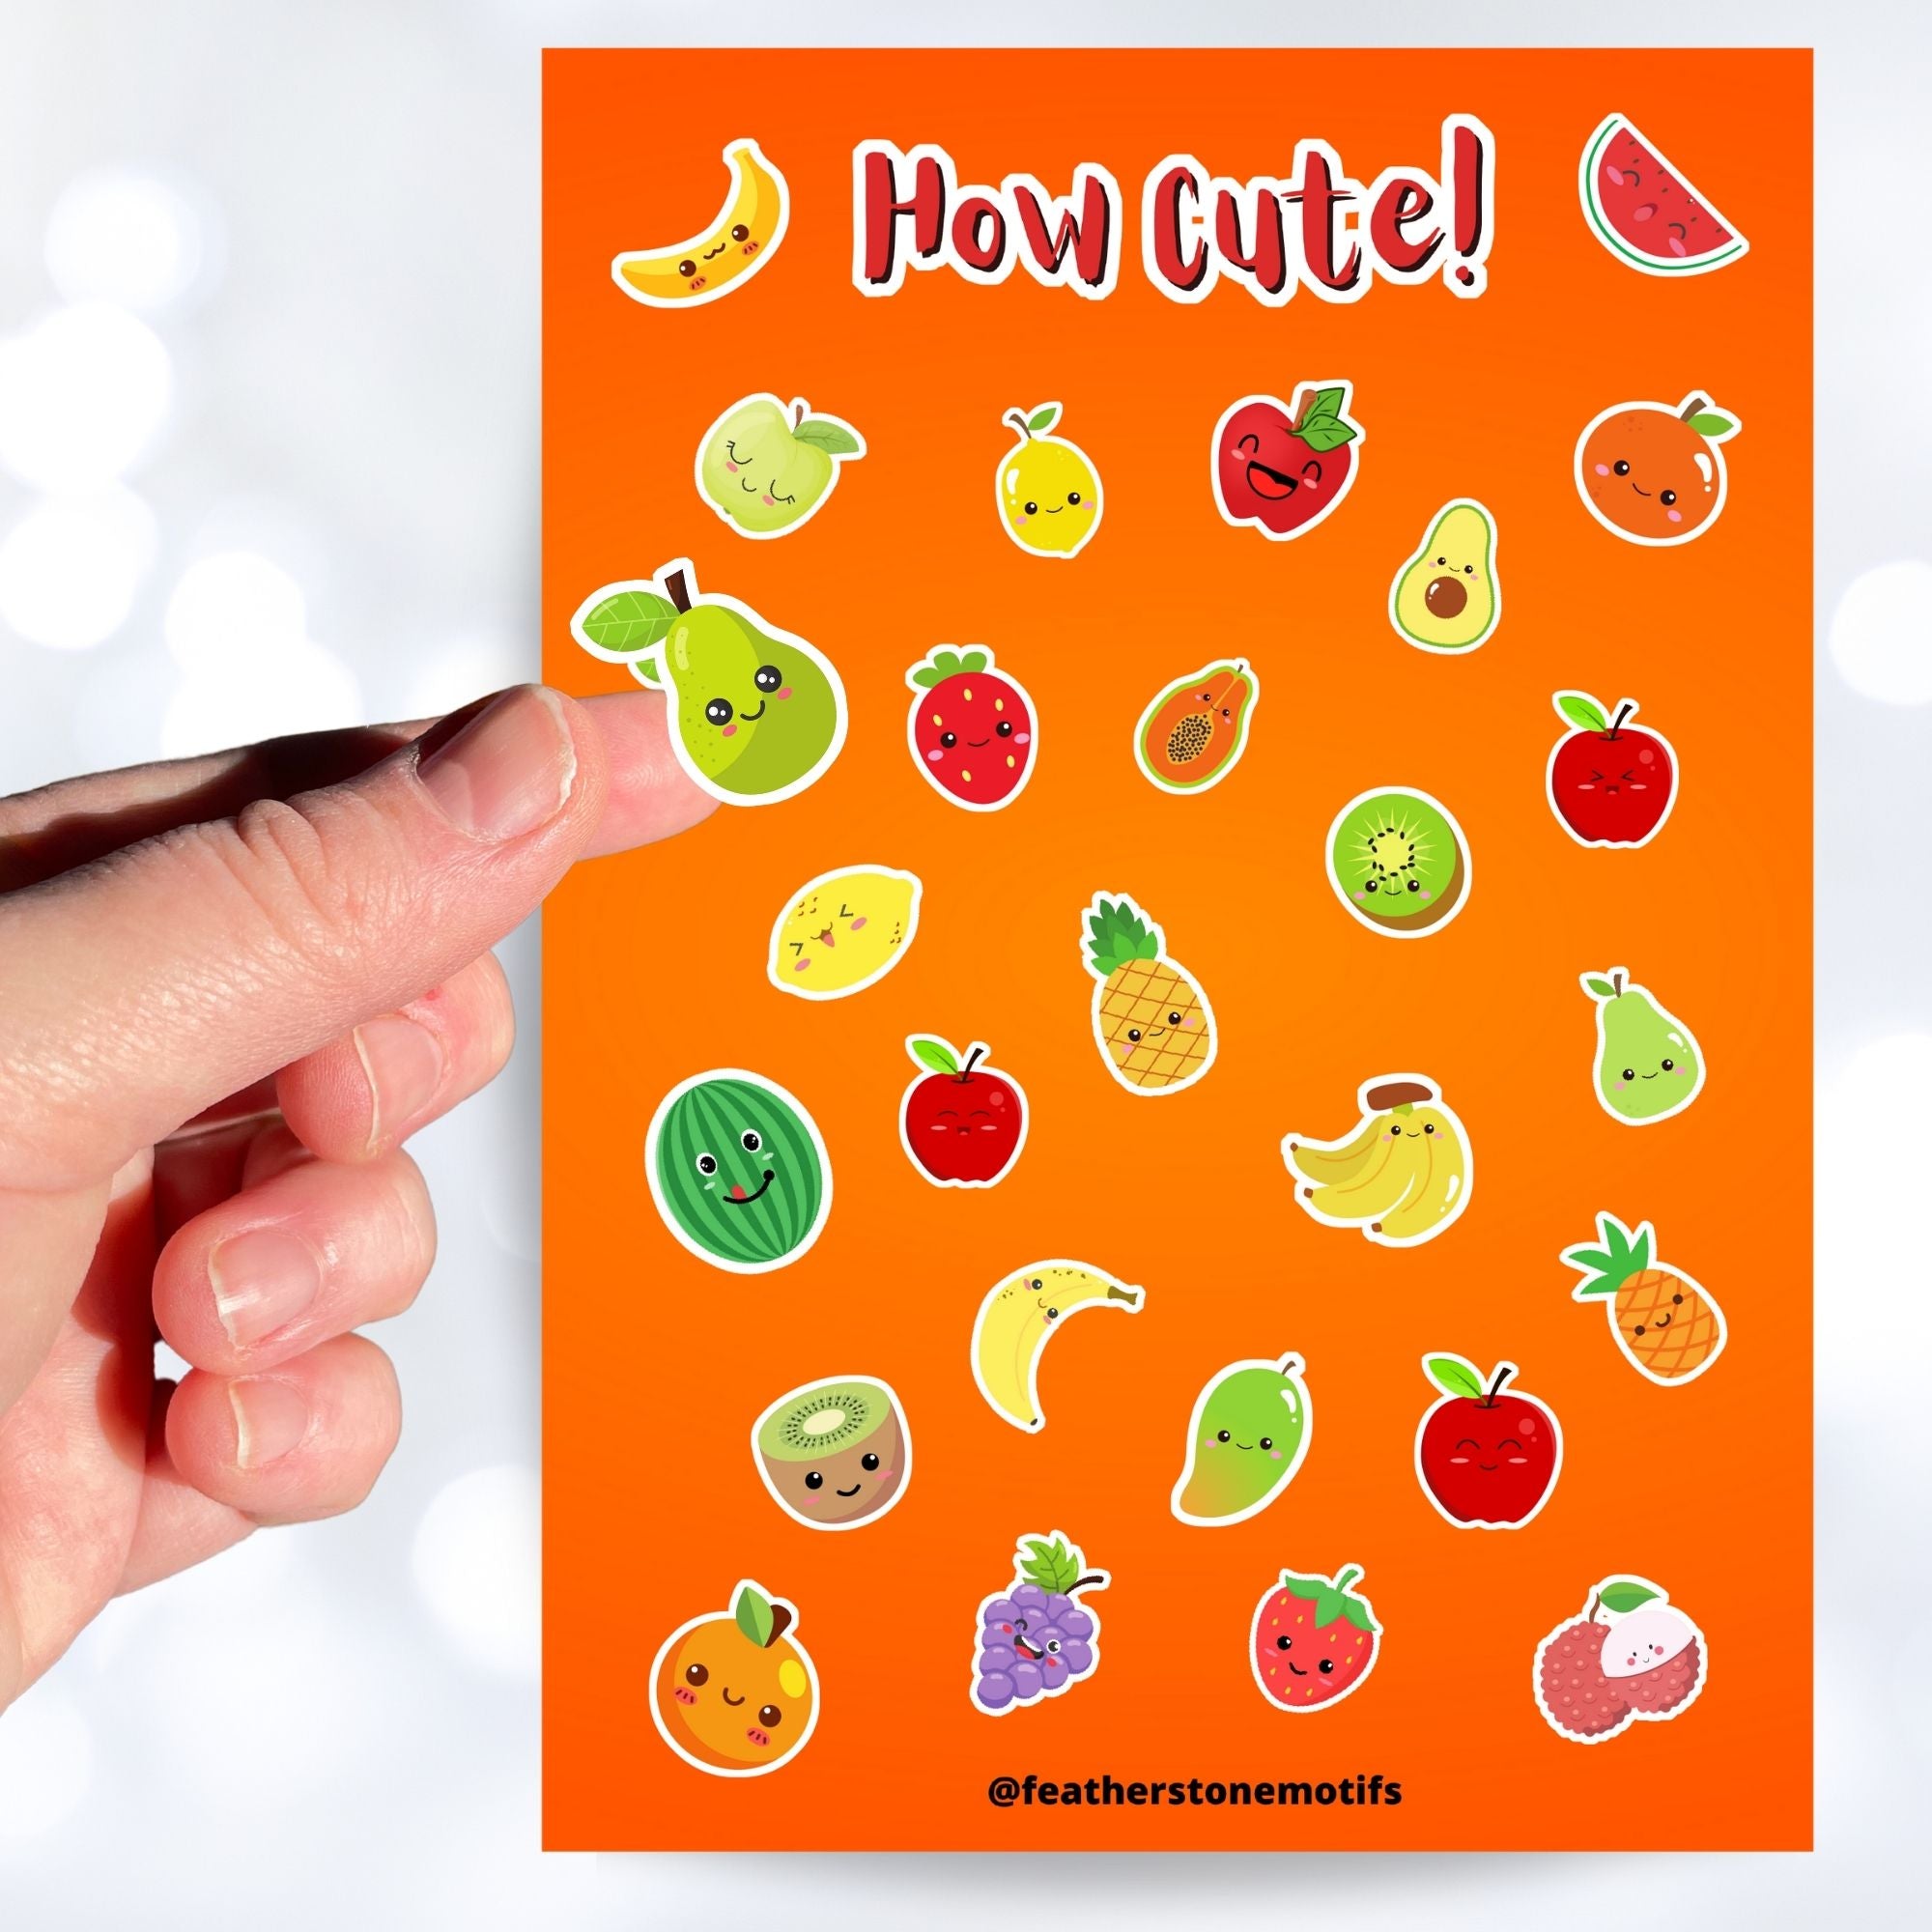 Filled with sticker images of cute fruit, this sticker sheet is sure to put a smile on anyone's face! This image shows a hand holding a sticker of a smiling pear over the sticker sheet.